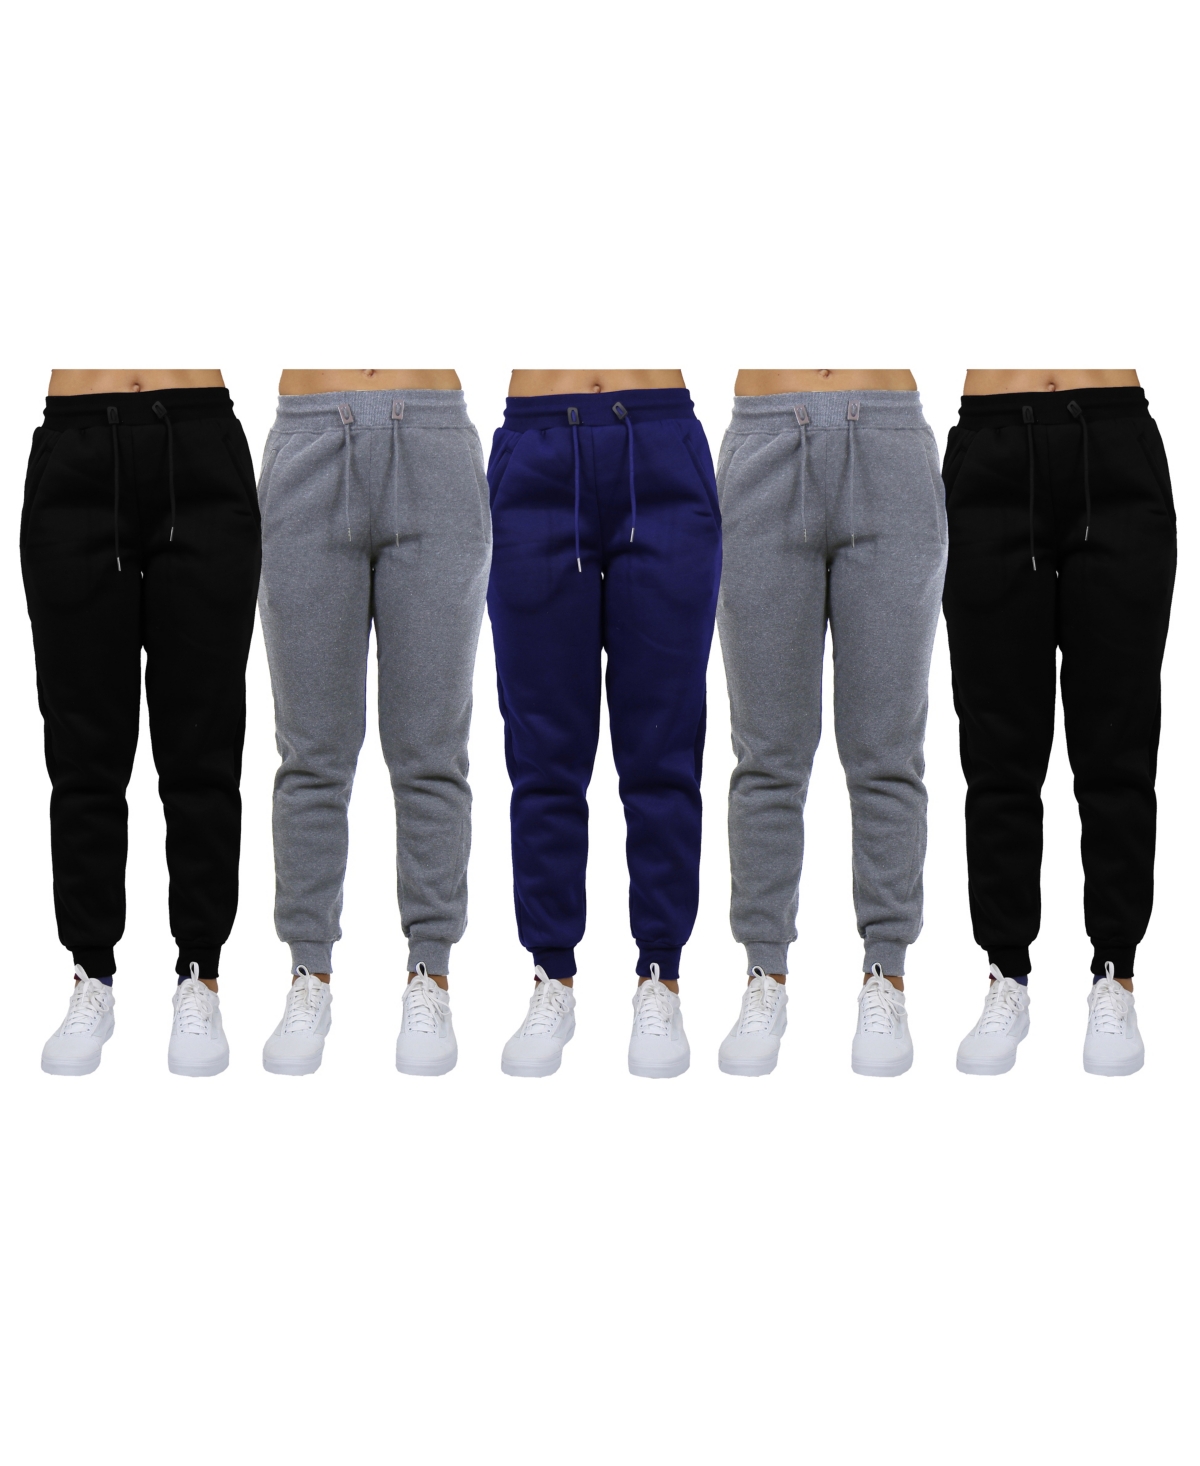 Galaxy By Harvic Women's Loose-Fit Fleece Jogger Sweatpants-5 Pack